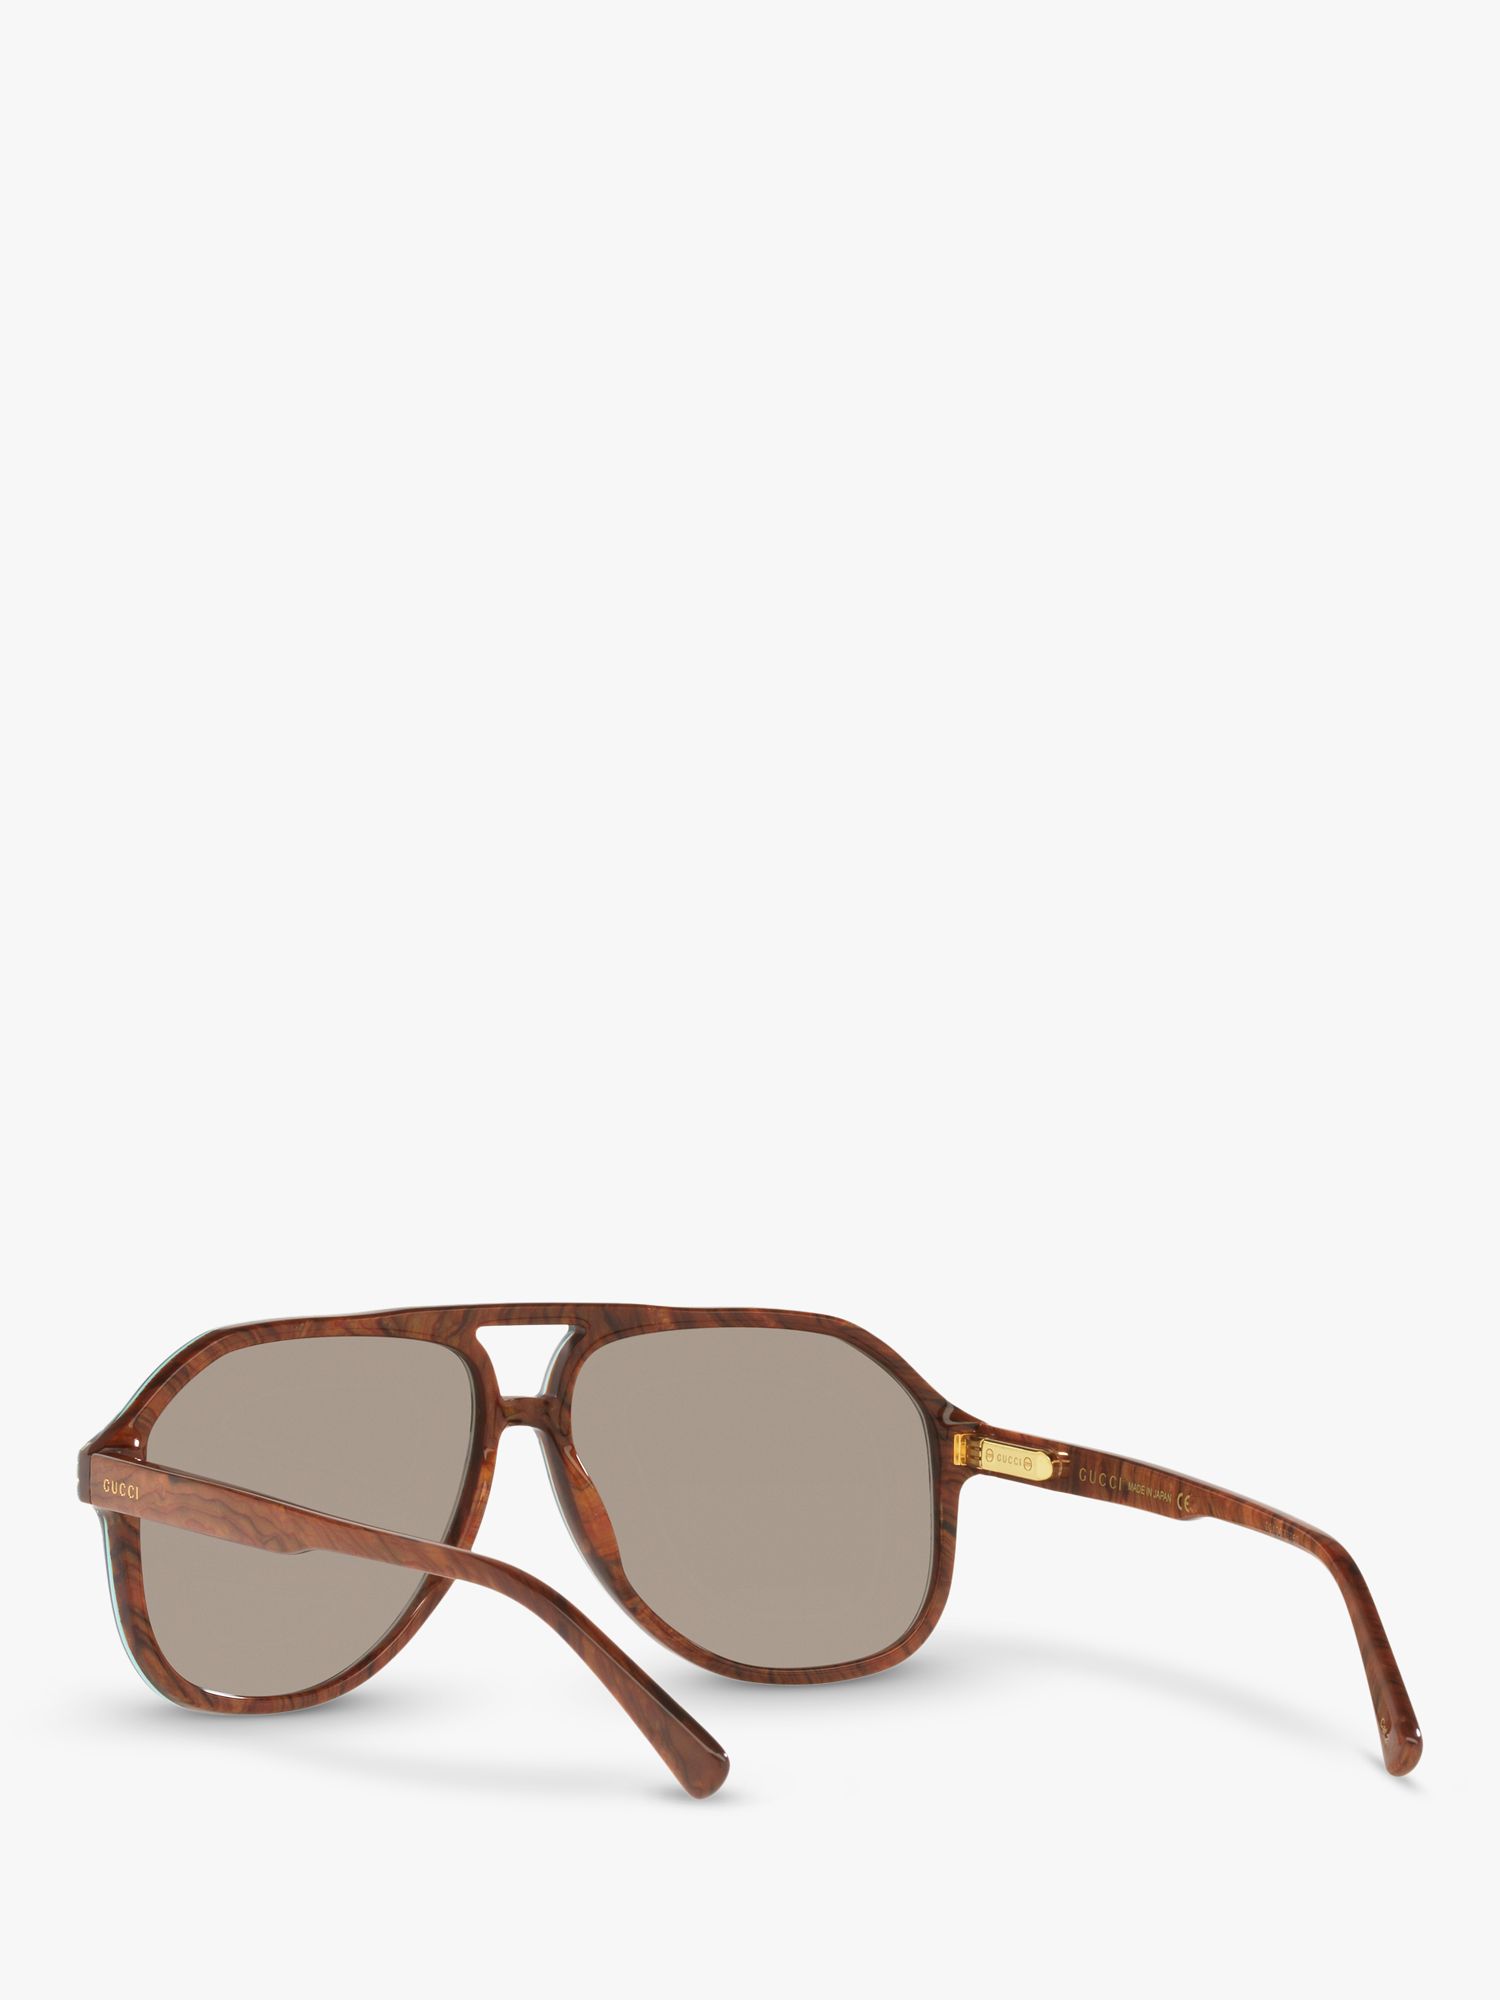 Gucci Gg1042s Men S Aviator Sunglasses Blue Brown Grey At John Lewis And Partners